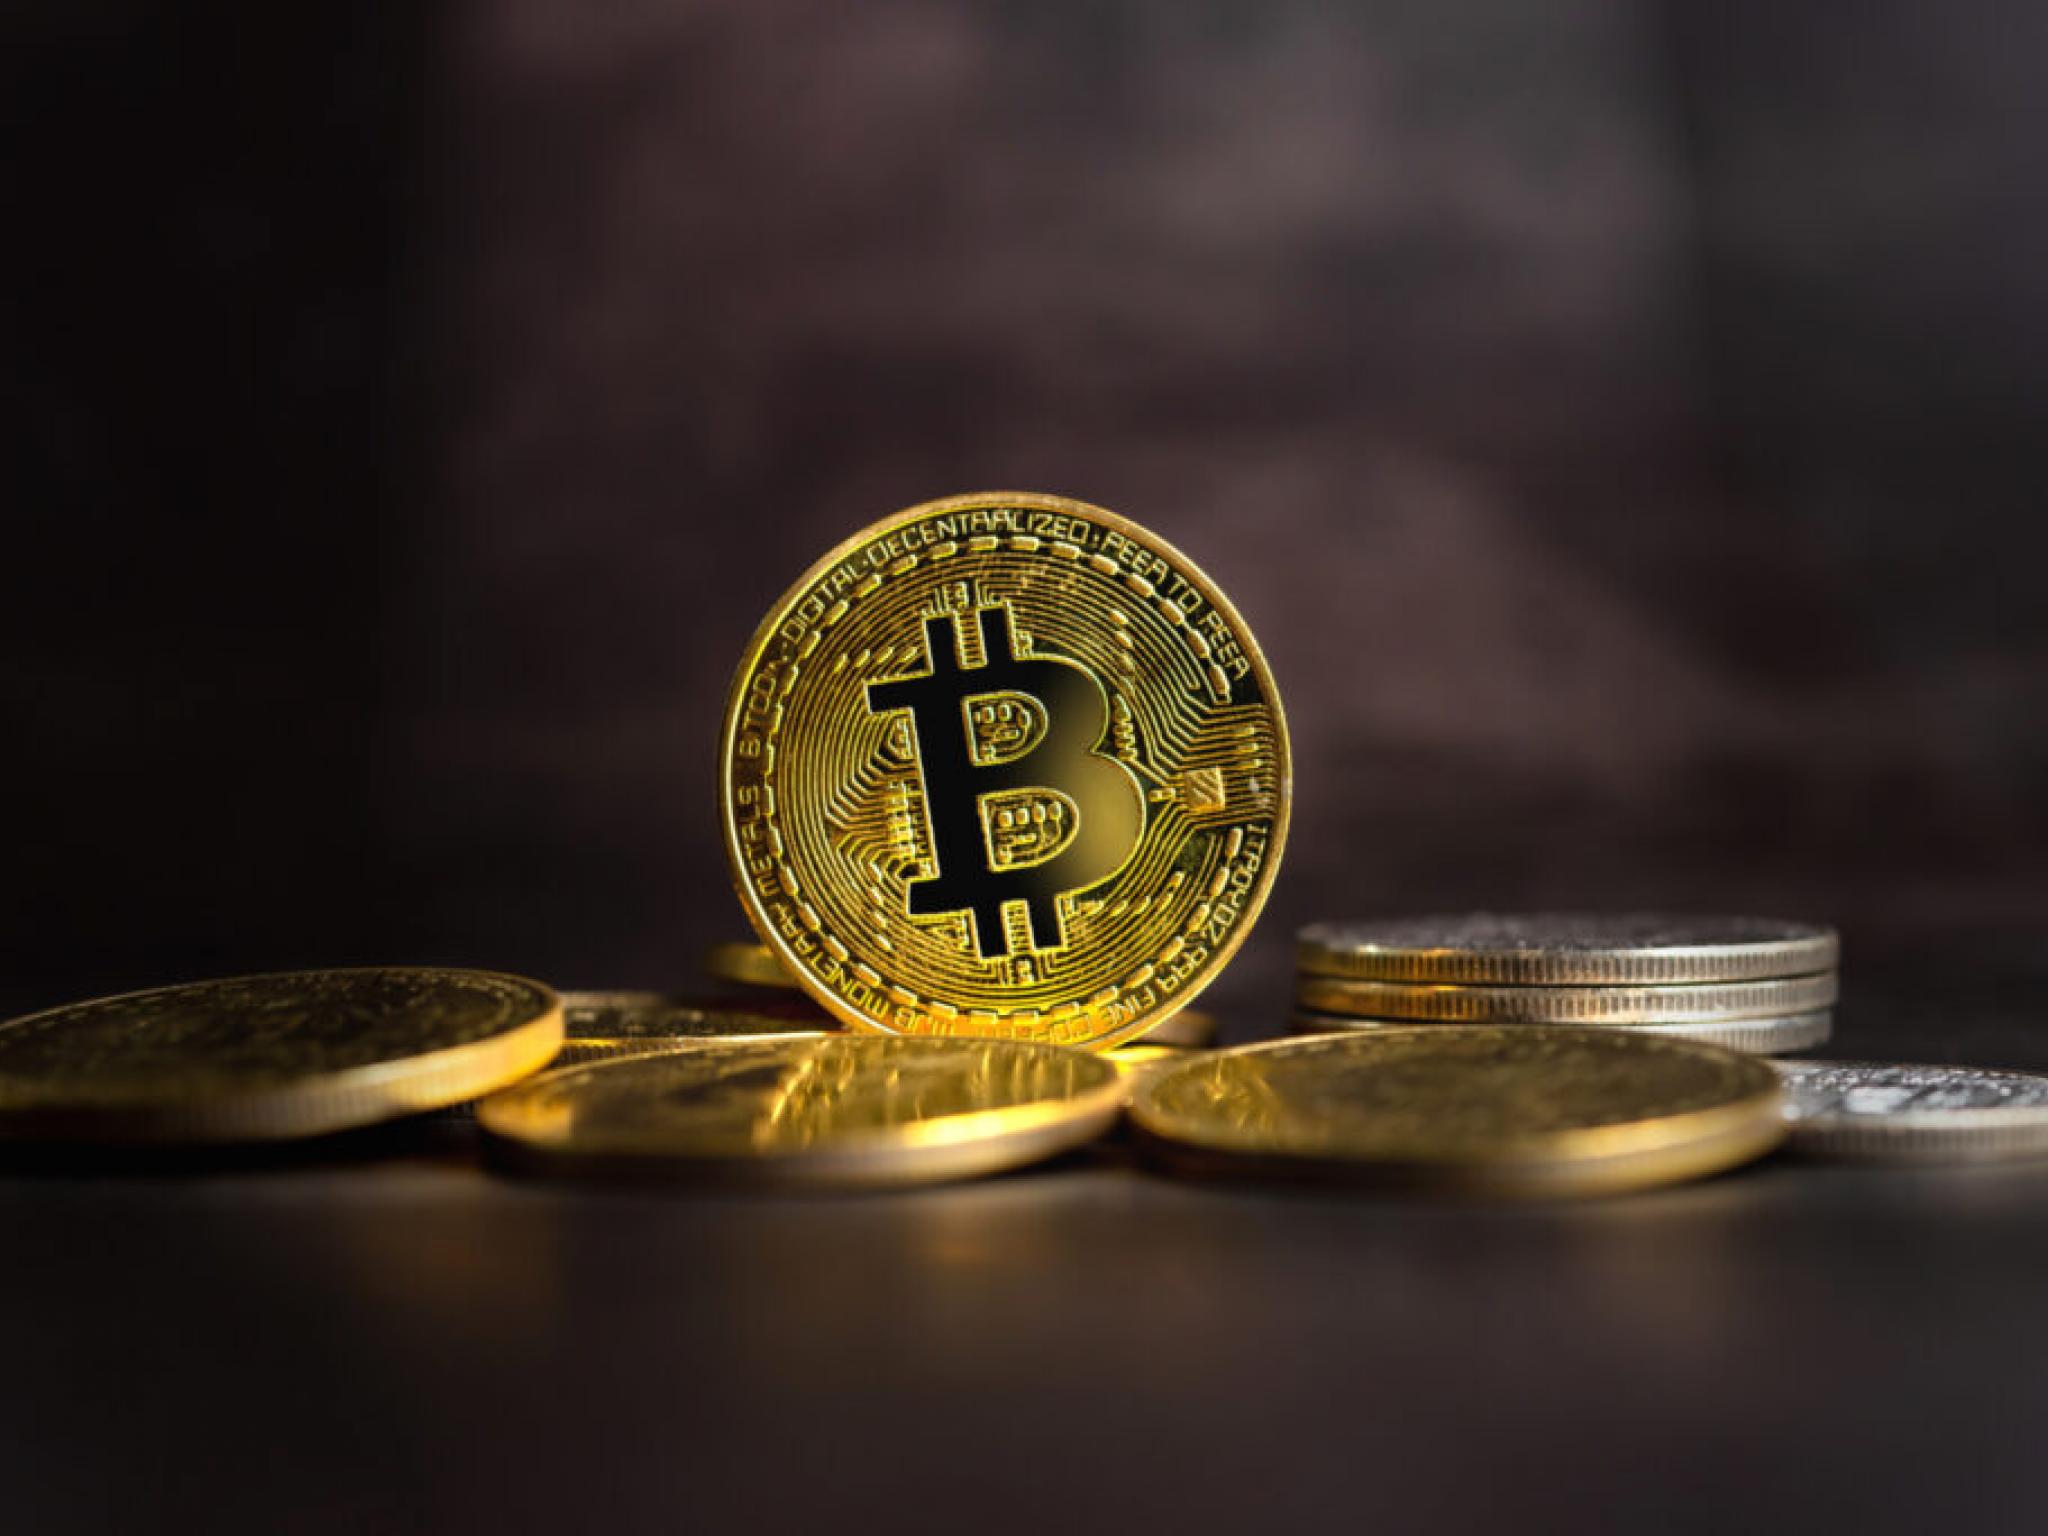  bitcoin-dropping-to-this-level-could-trigger-over-15b-in-liquidations-on-binance-warns-analyst 